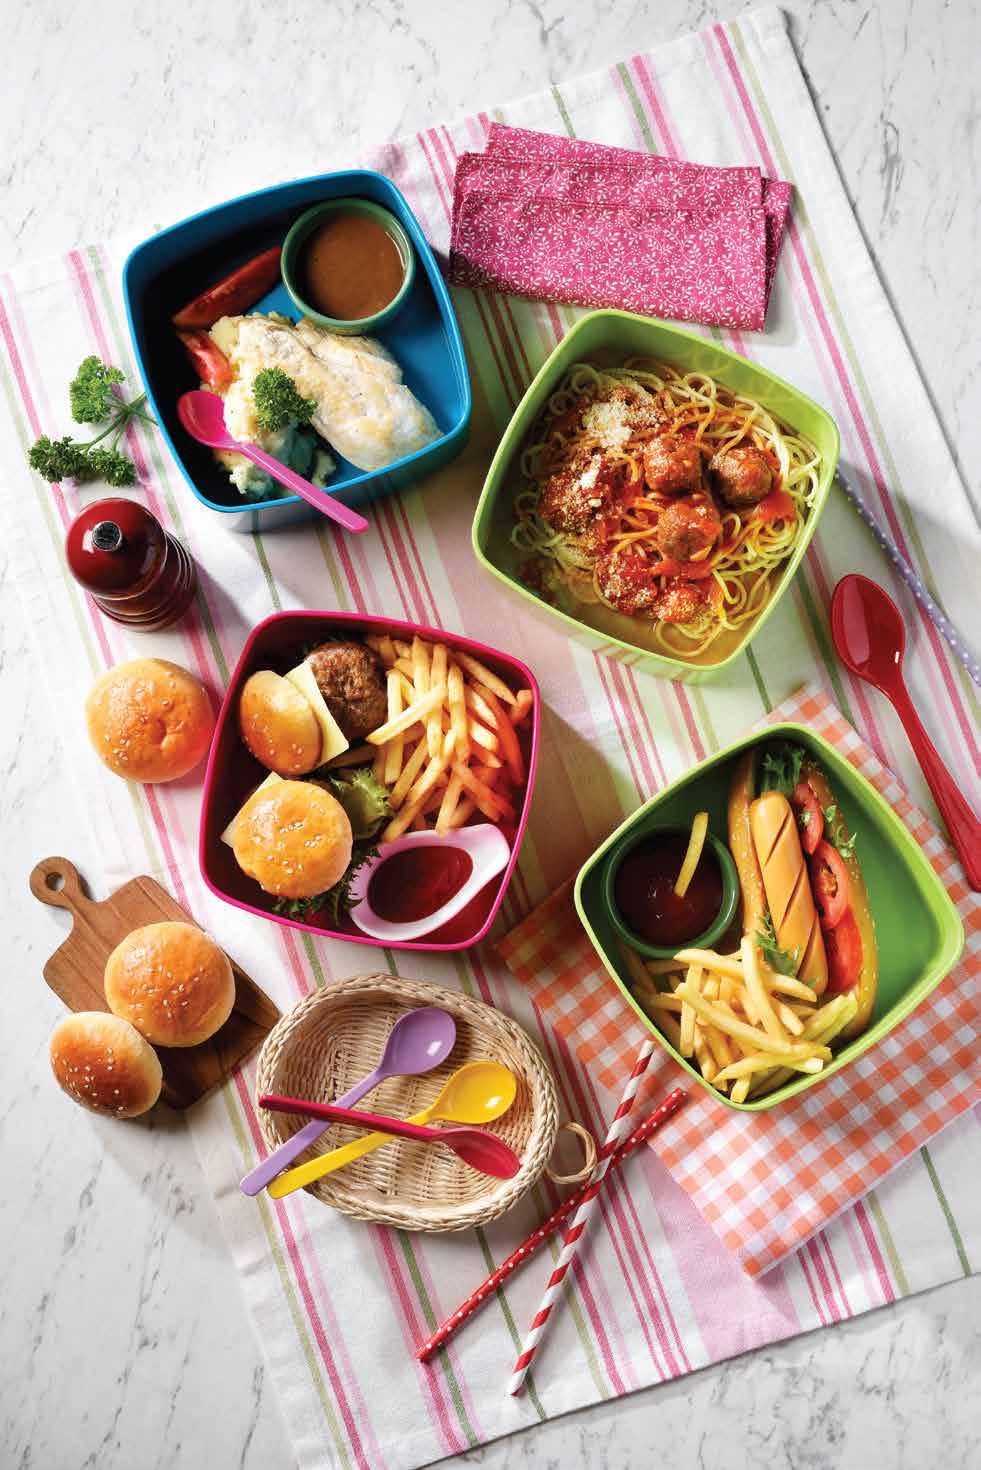 Kids Menu Main 95 Spaghetti and Meatballs 91 Mini Beef Burger 190 cheddar and lettuce 92 Chicken Fillets 190 grilled chicken breast with mashed potatoes 93 Hot Dog 120 bun and sausages 92 Chicken